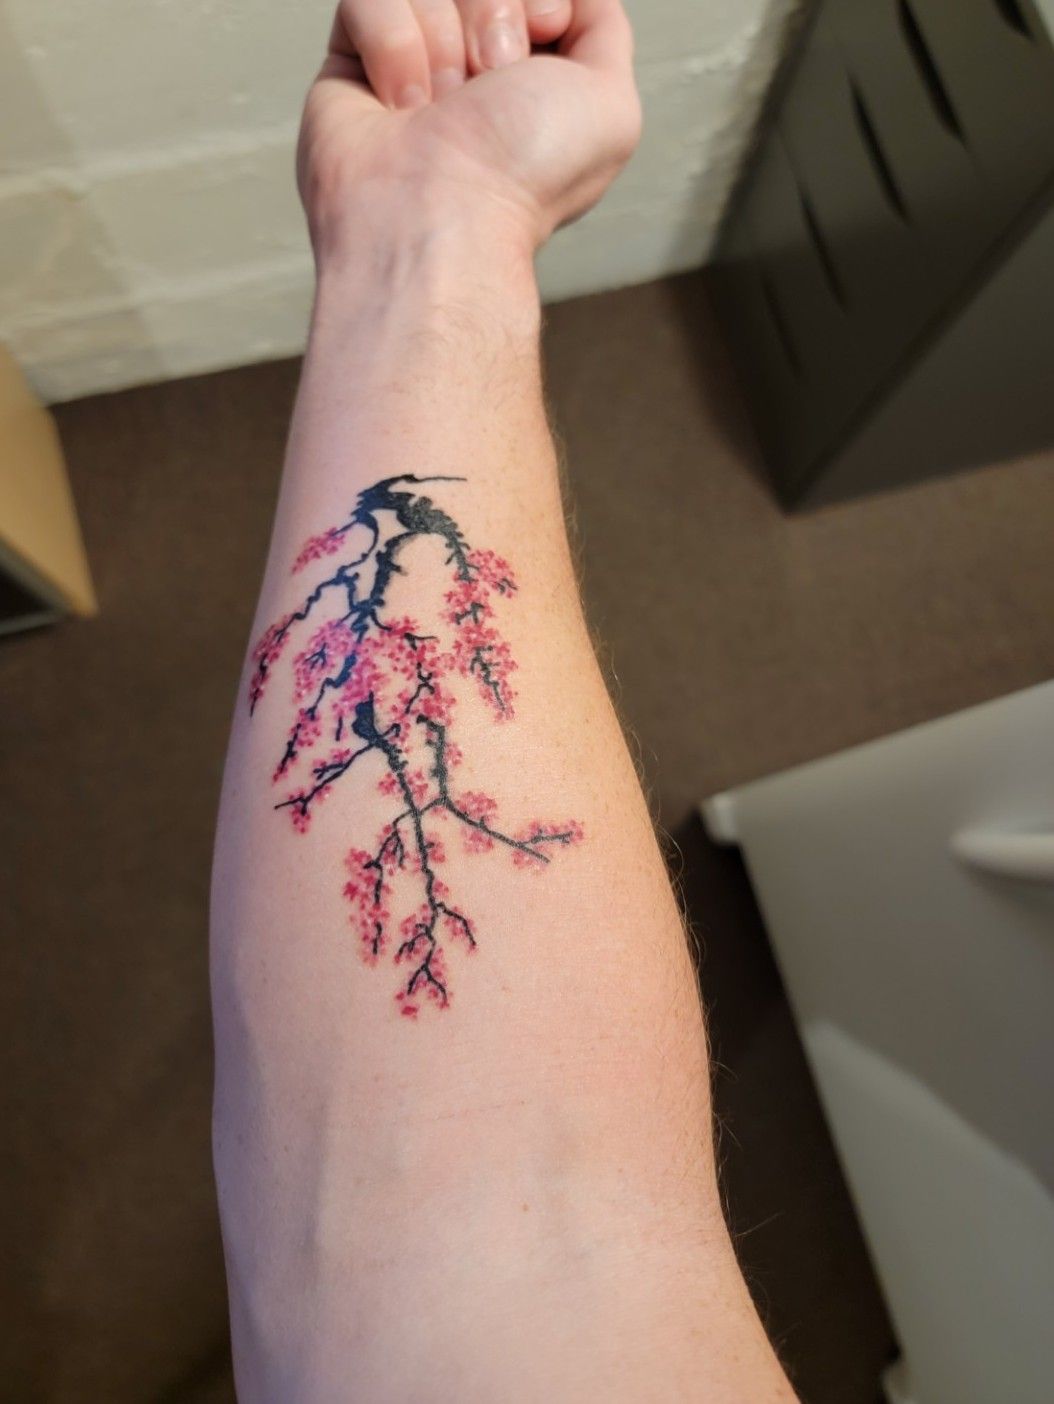 Lady Pirates Tattoo Studio - By Carrie.... The sugar plum tree, loved  turning this poem into something special x | Facebook